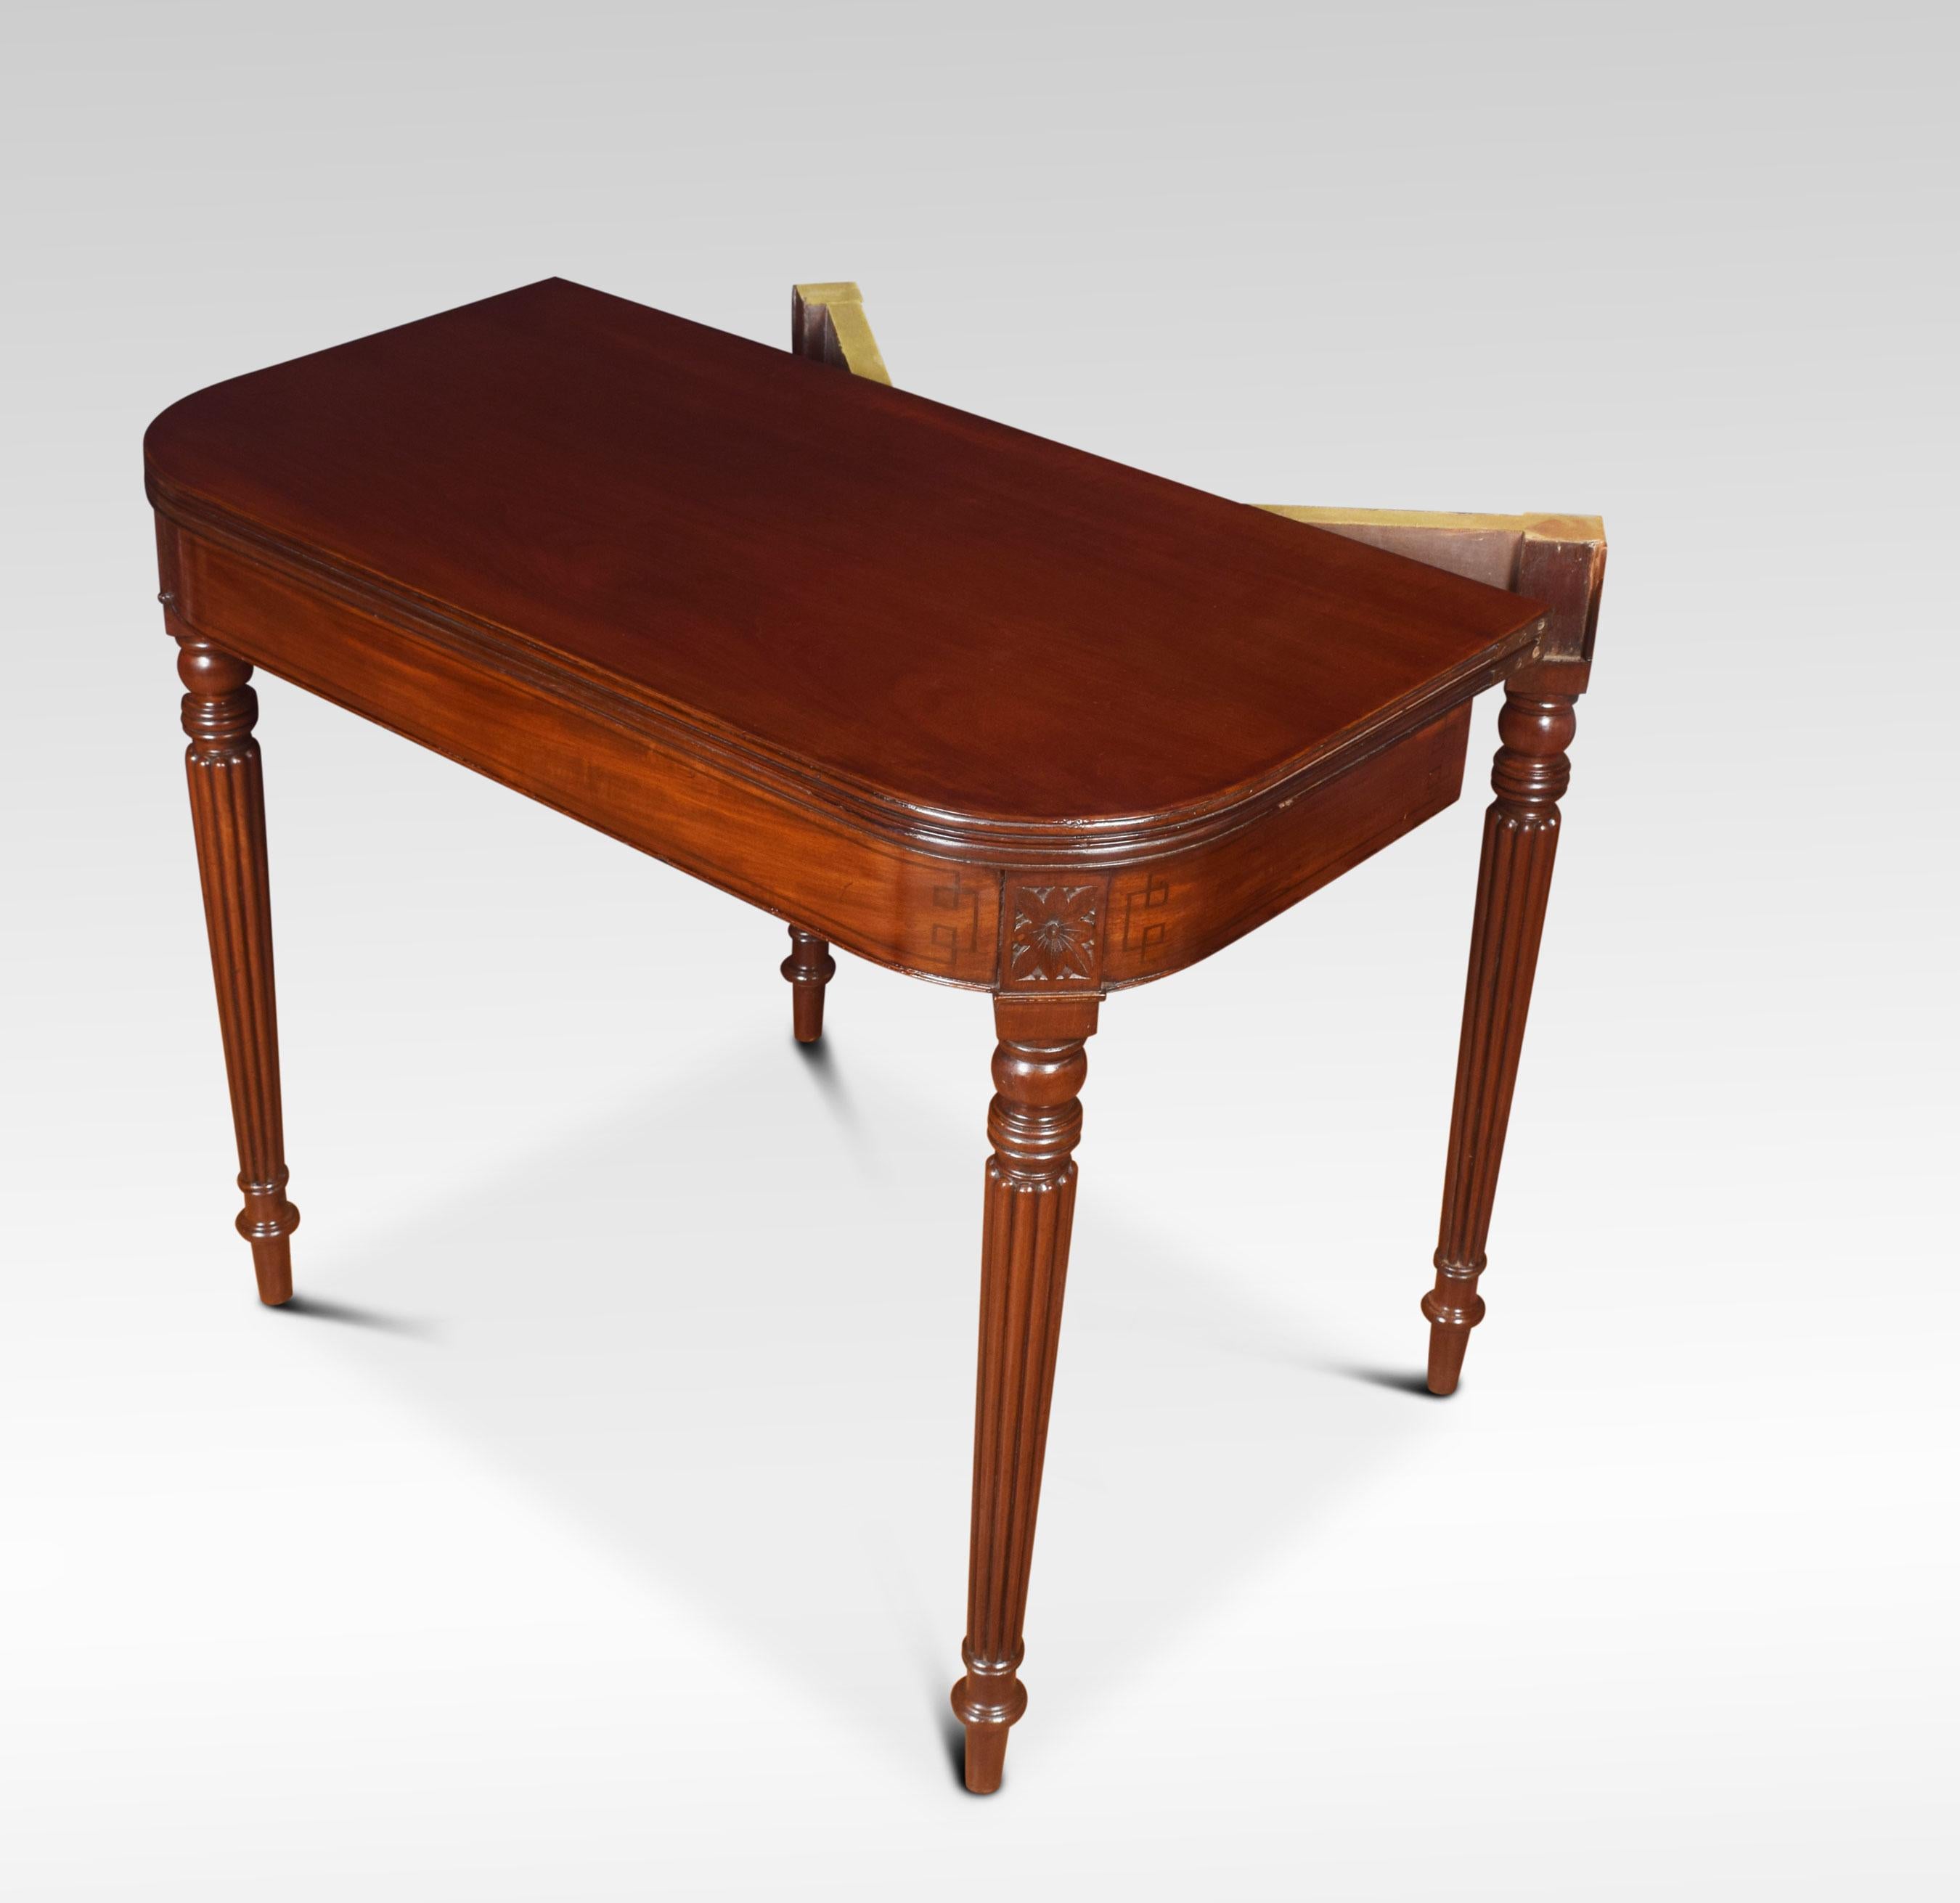 Regency Mahogany Tea Table In Good Condition For Sale In Cheshire, GB